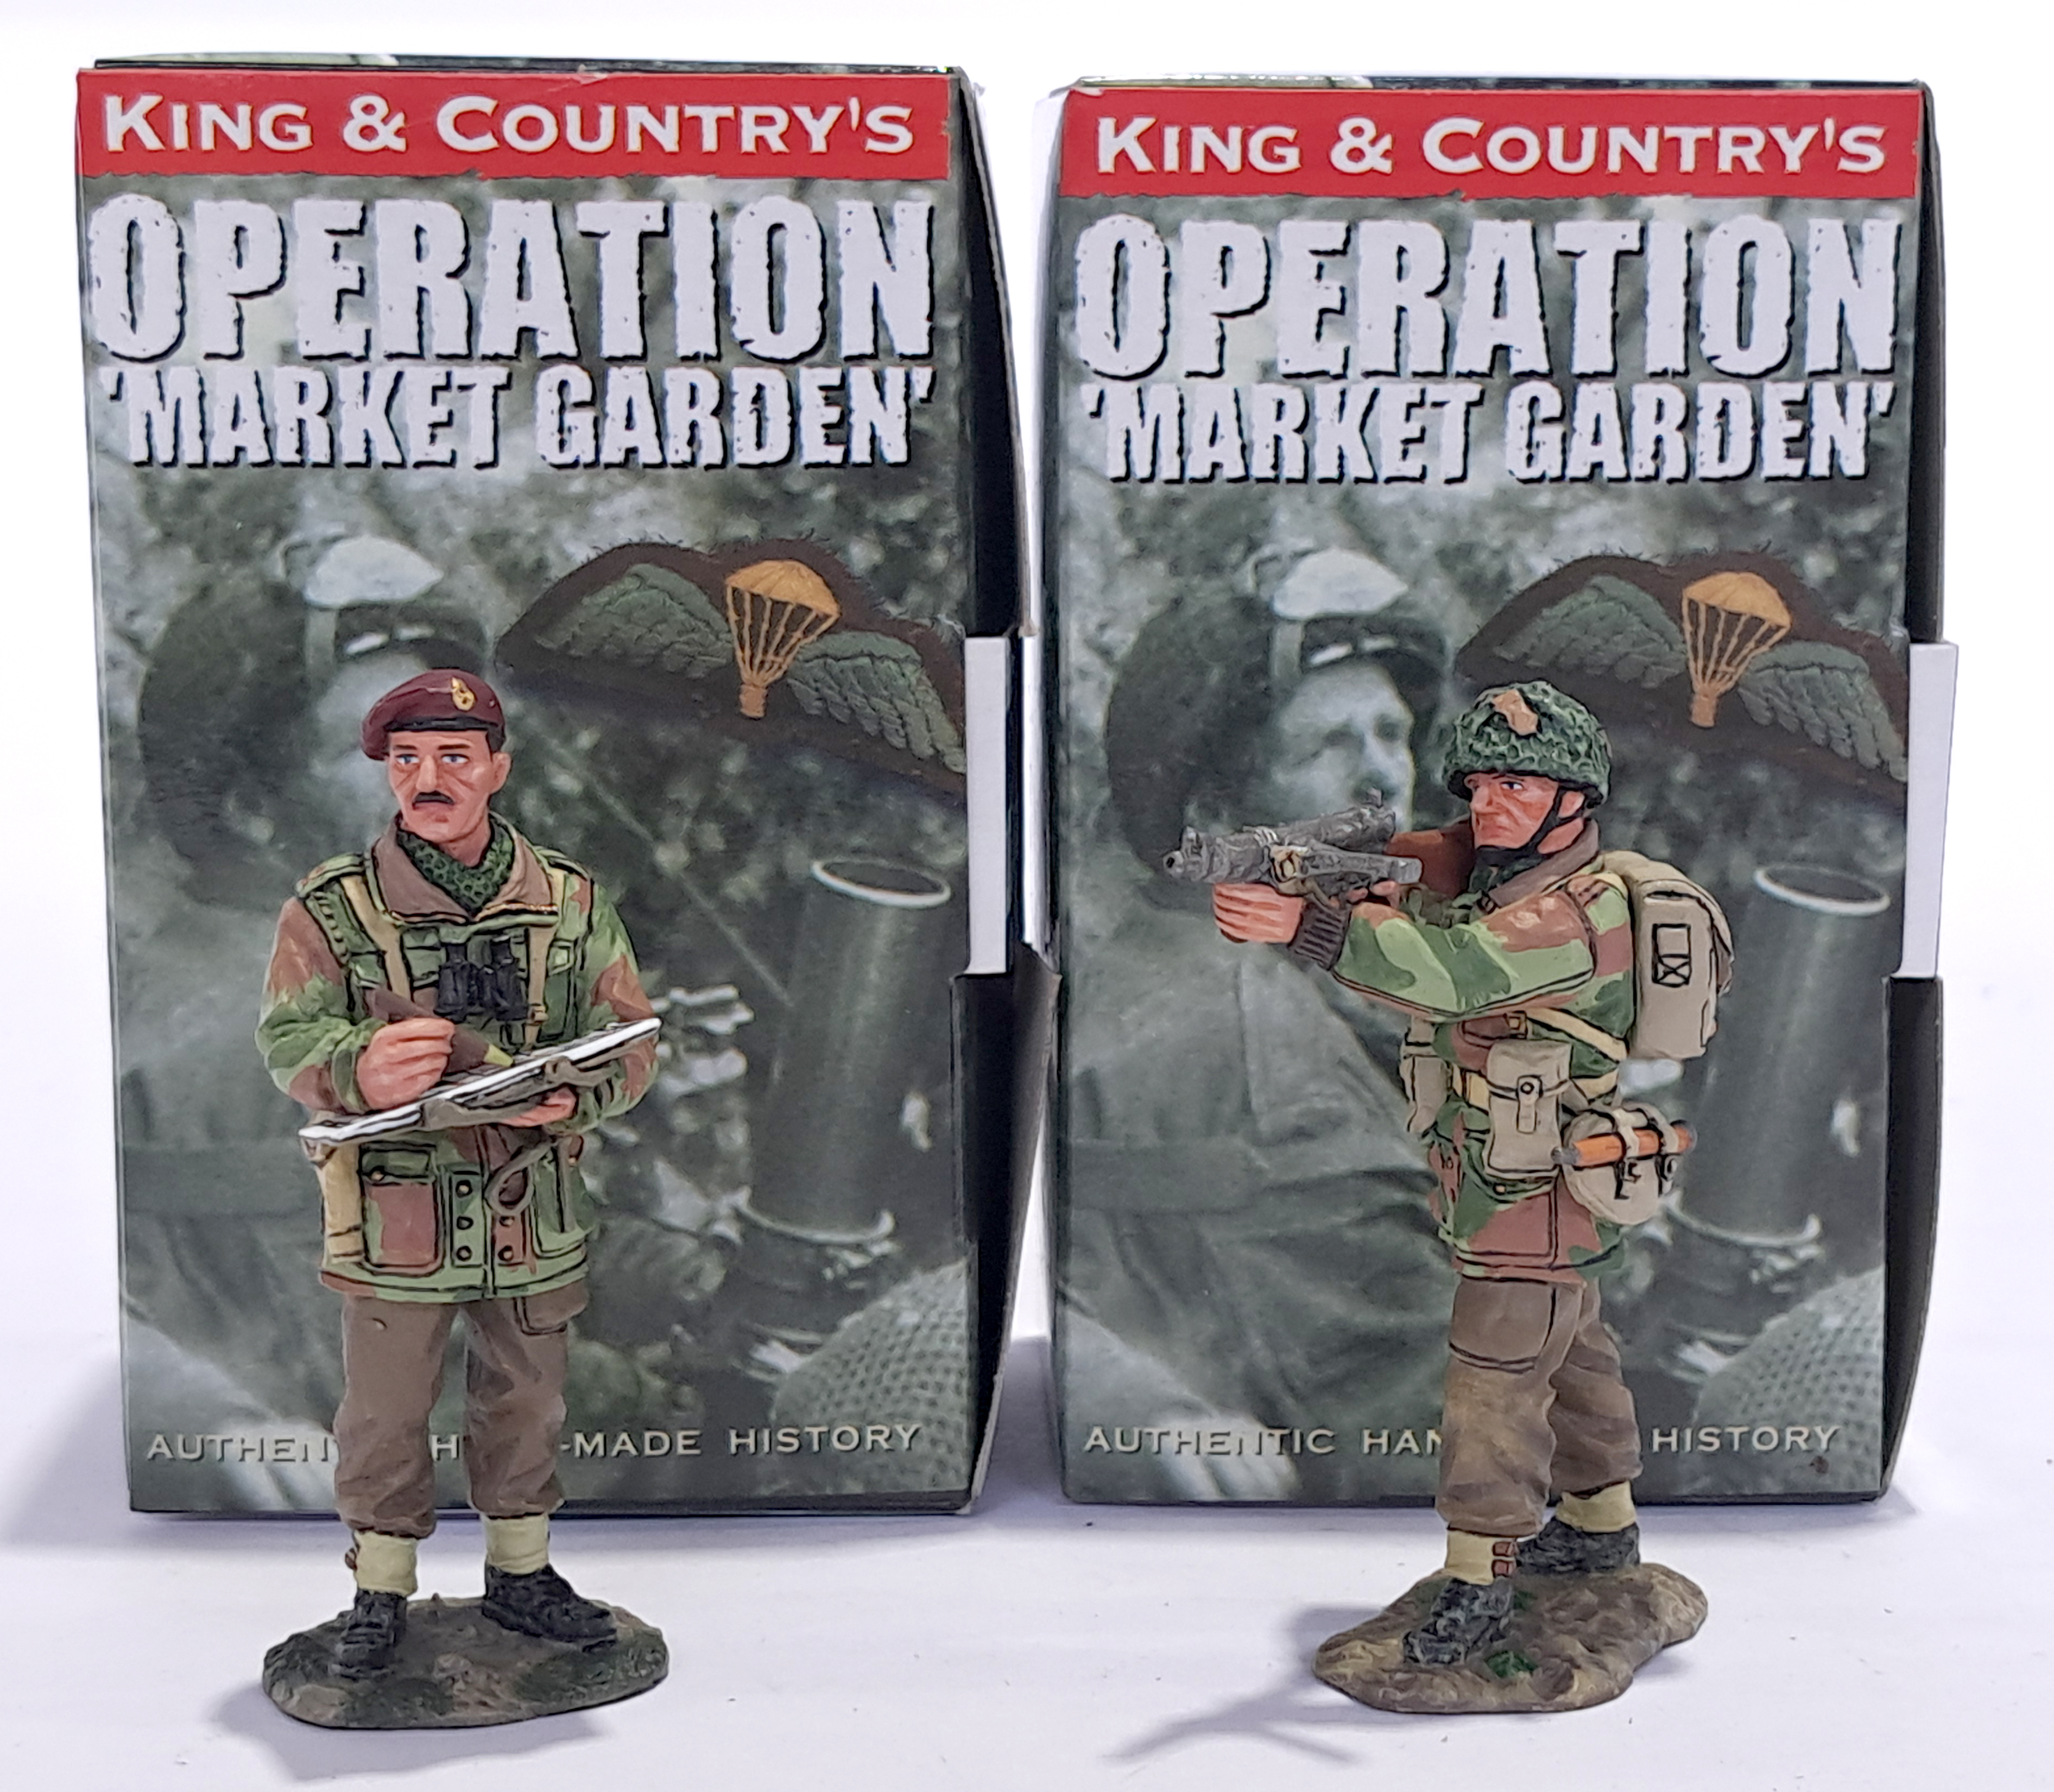 King & Country's a boxed 1:30 scale hand made figure pair